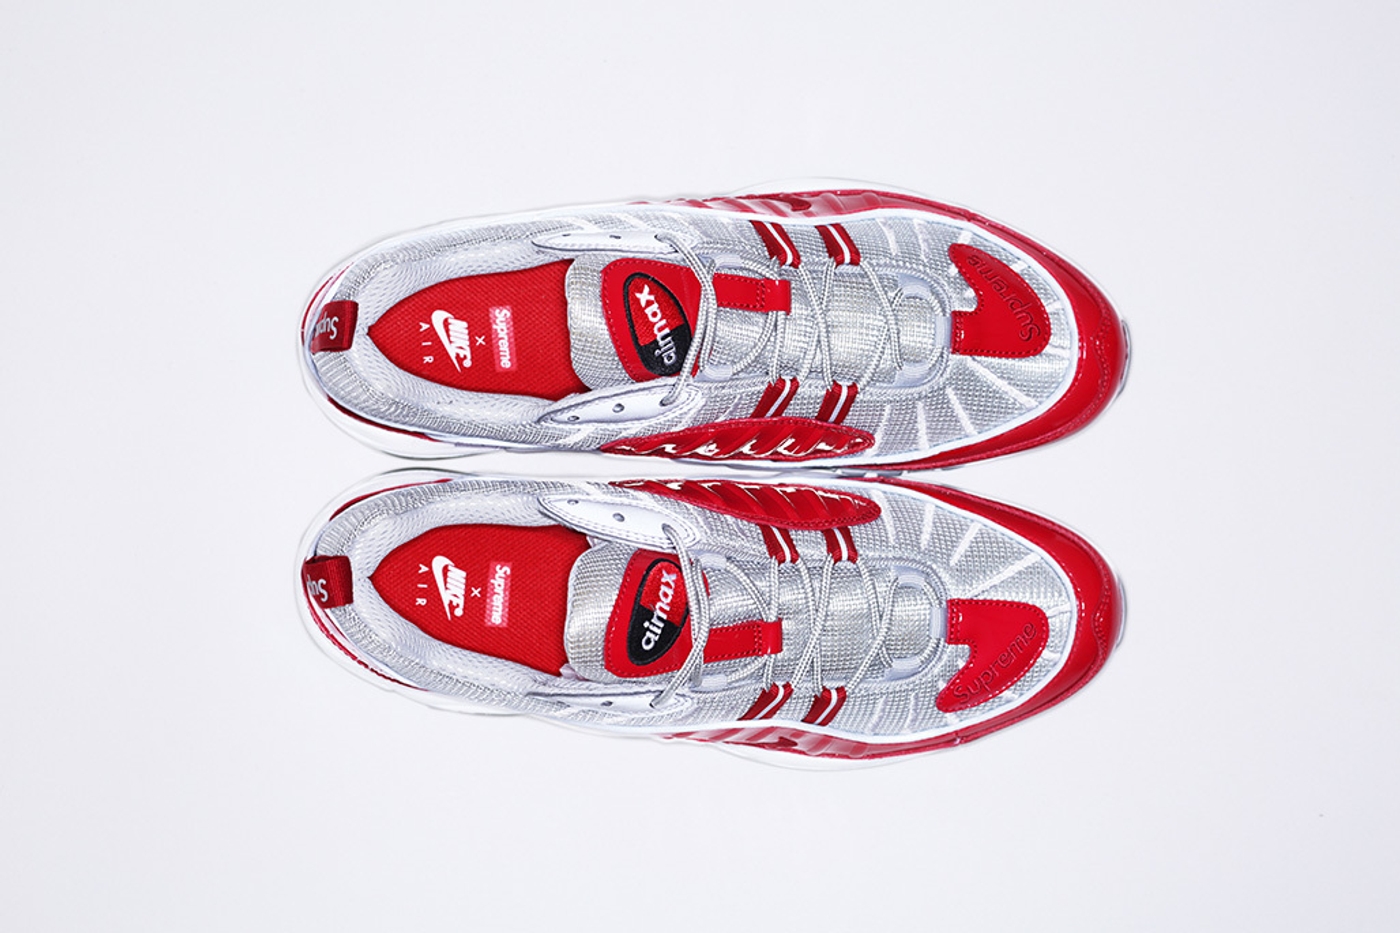 Red Patent Leather Air Max 98 (7/15)